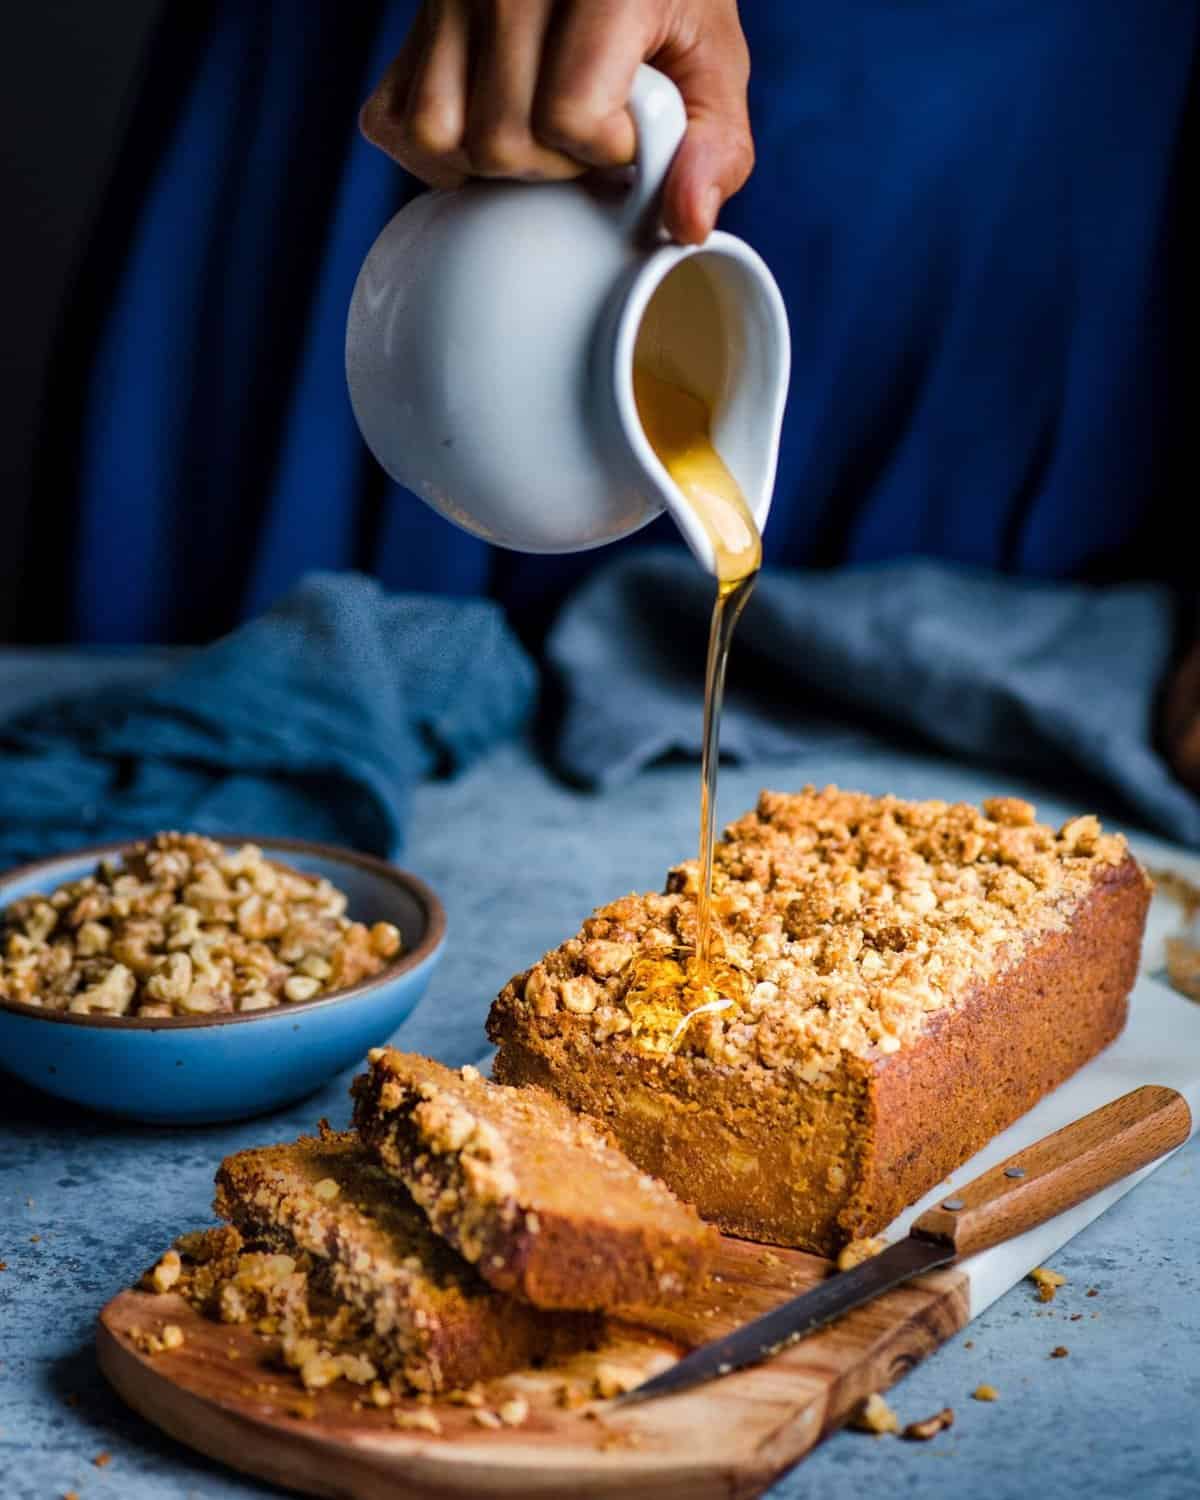 Hand shown to be pouring drizzle over a kabocha squash banana bread with blue backdrops.